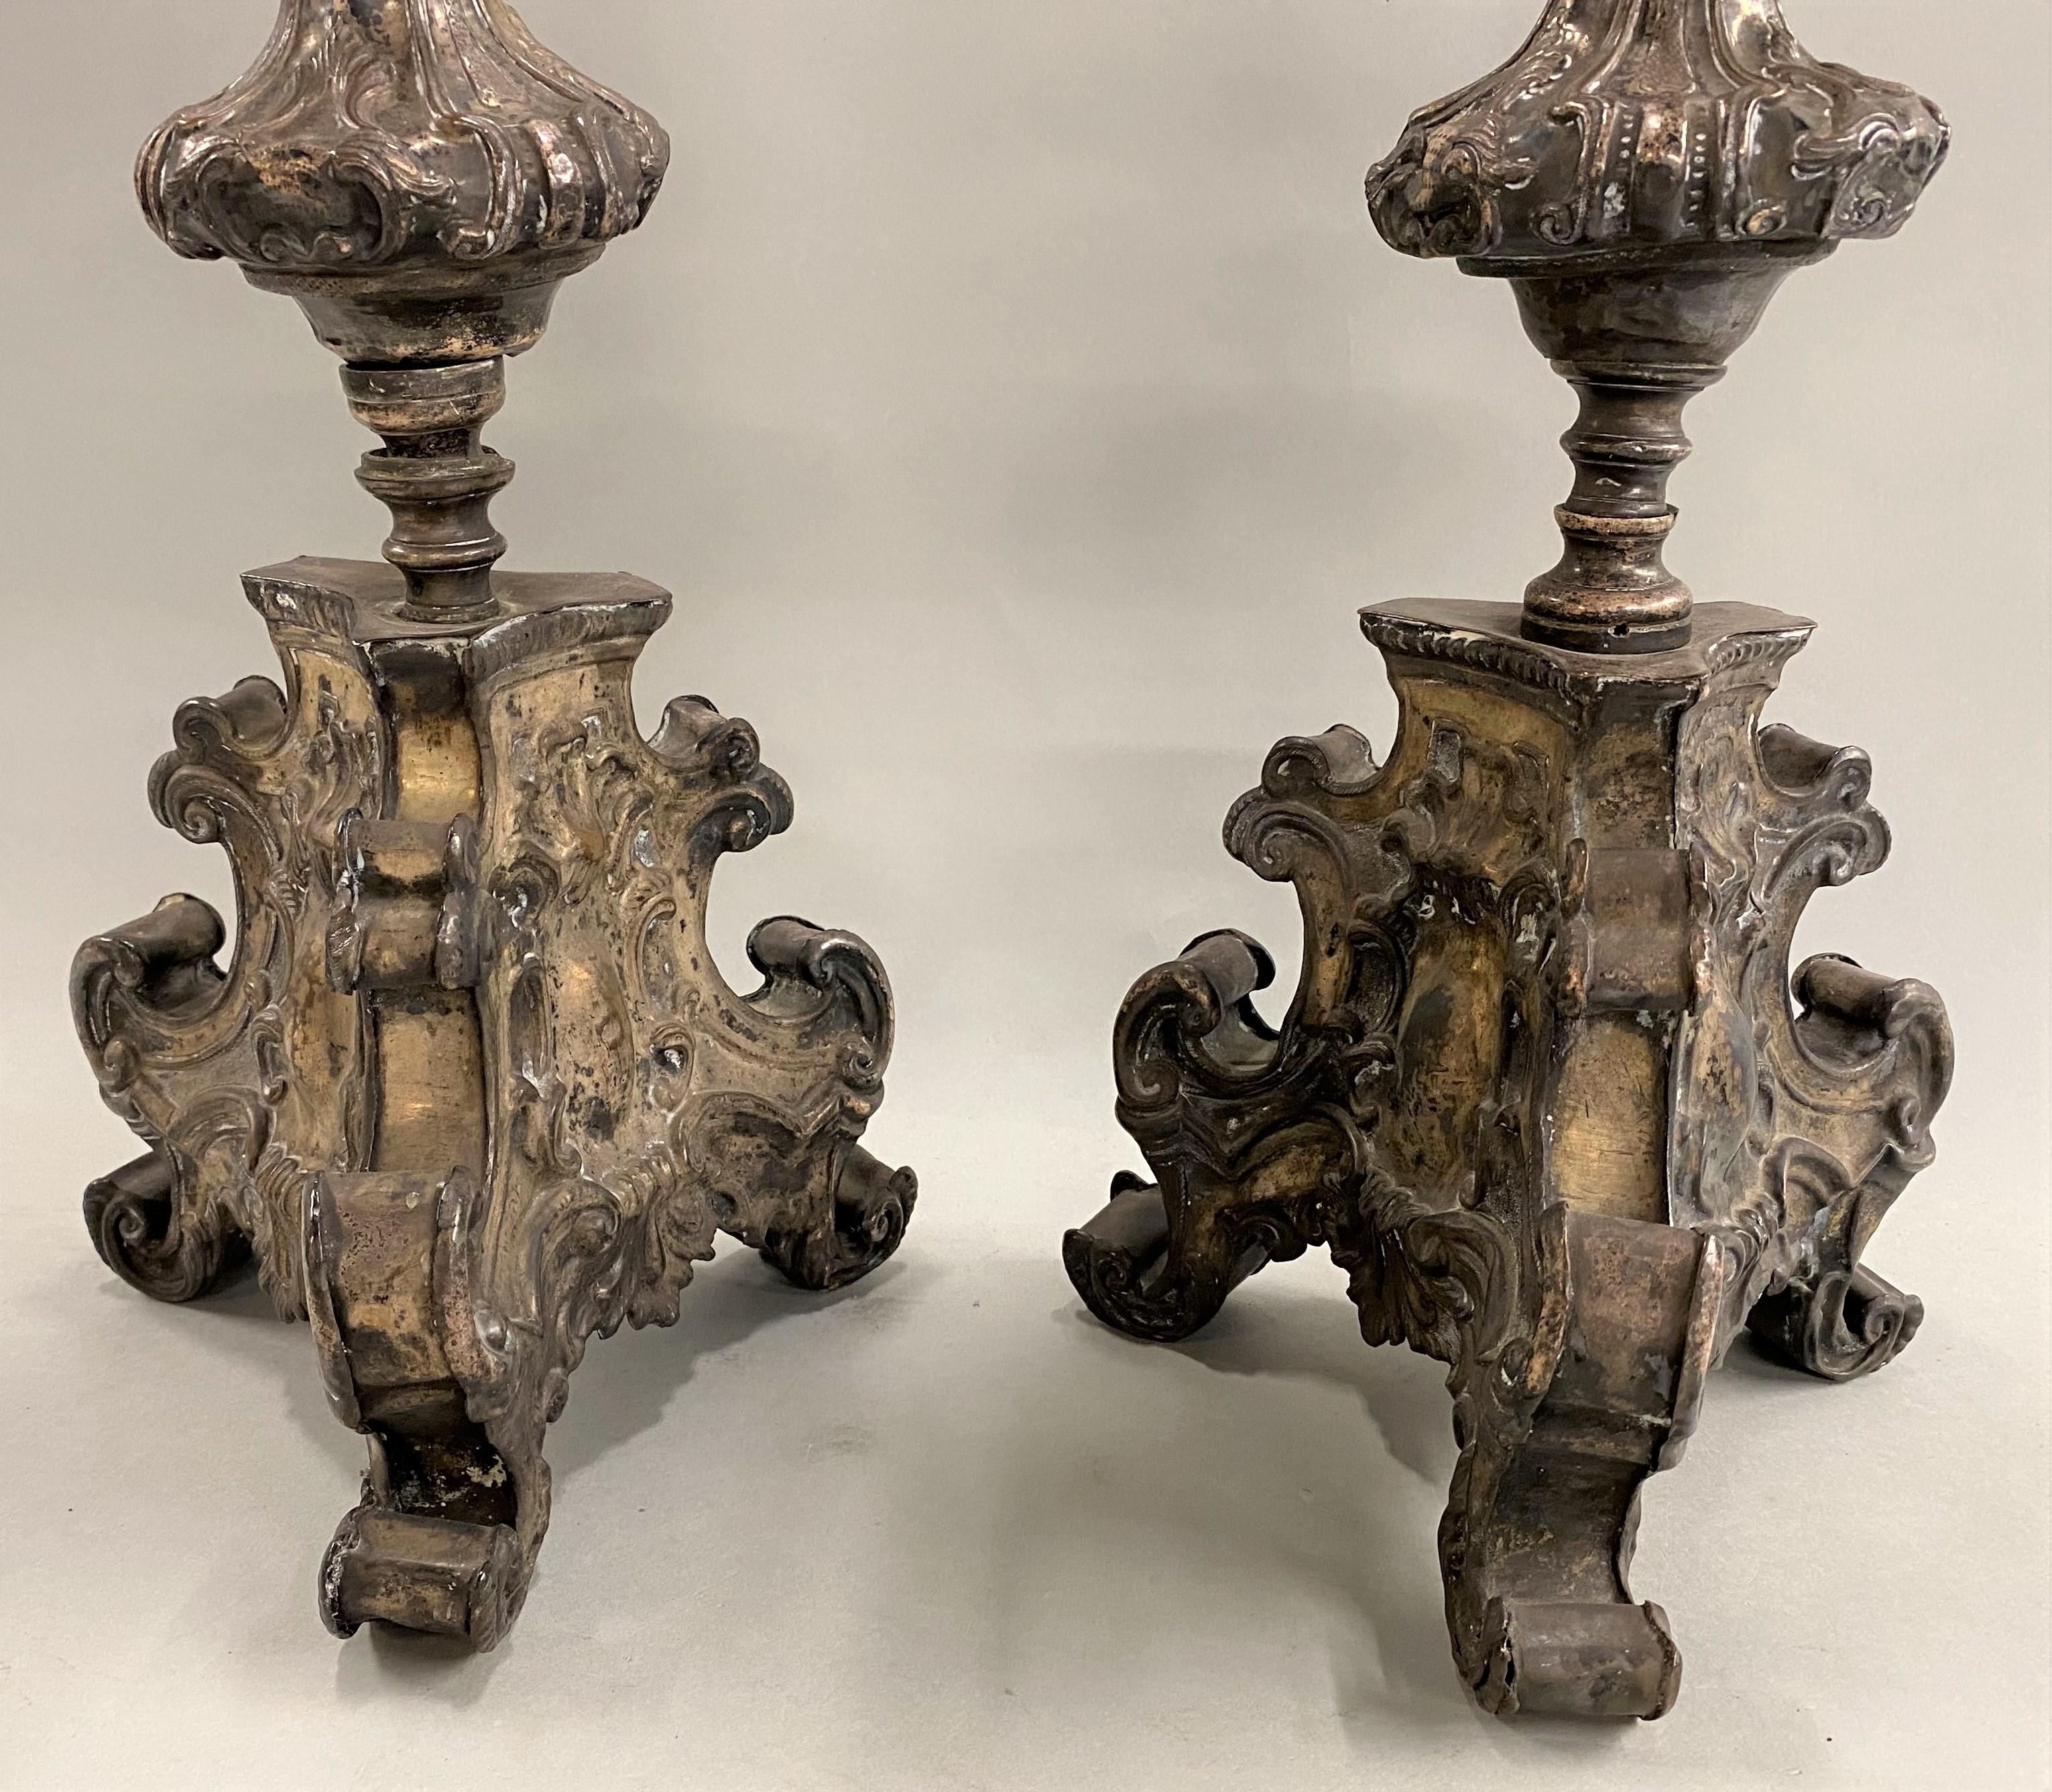 Pair of 18th Century Italian Baroque Style Pressed Metal Candlesticks In Good Condition For Sale In Milford, NH